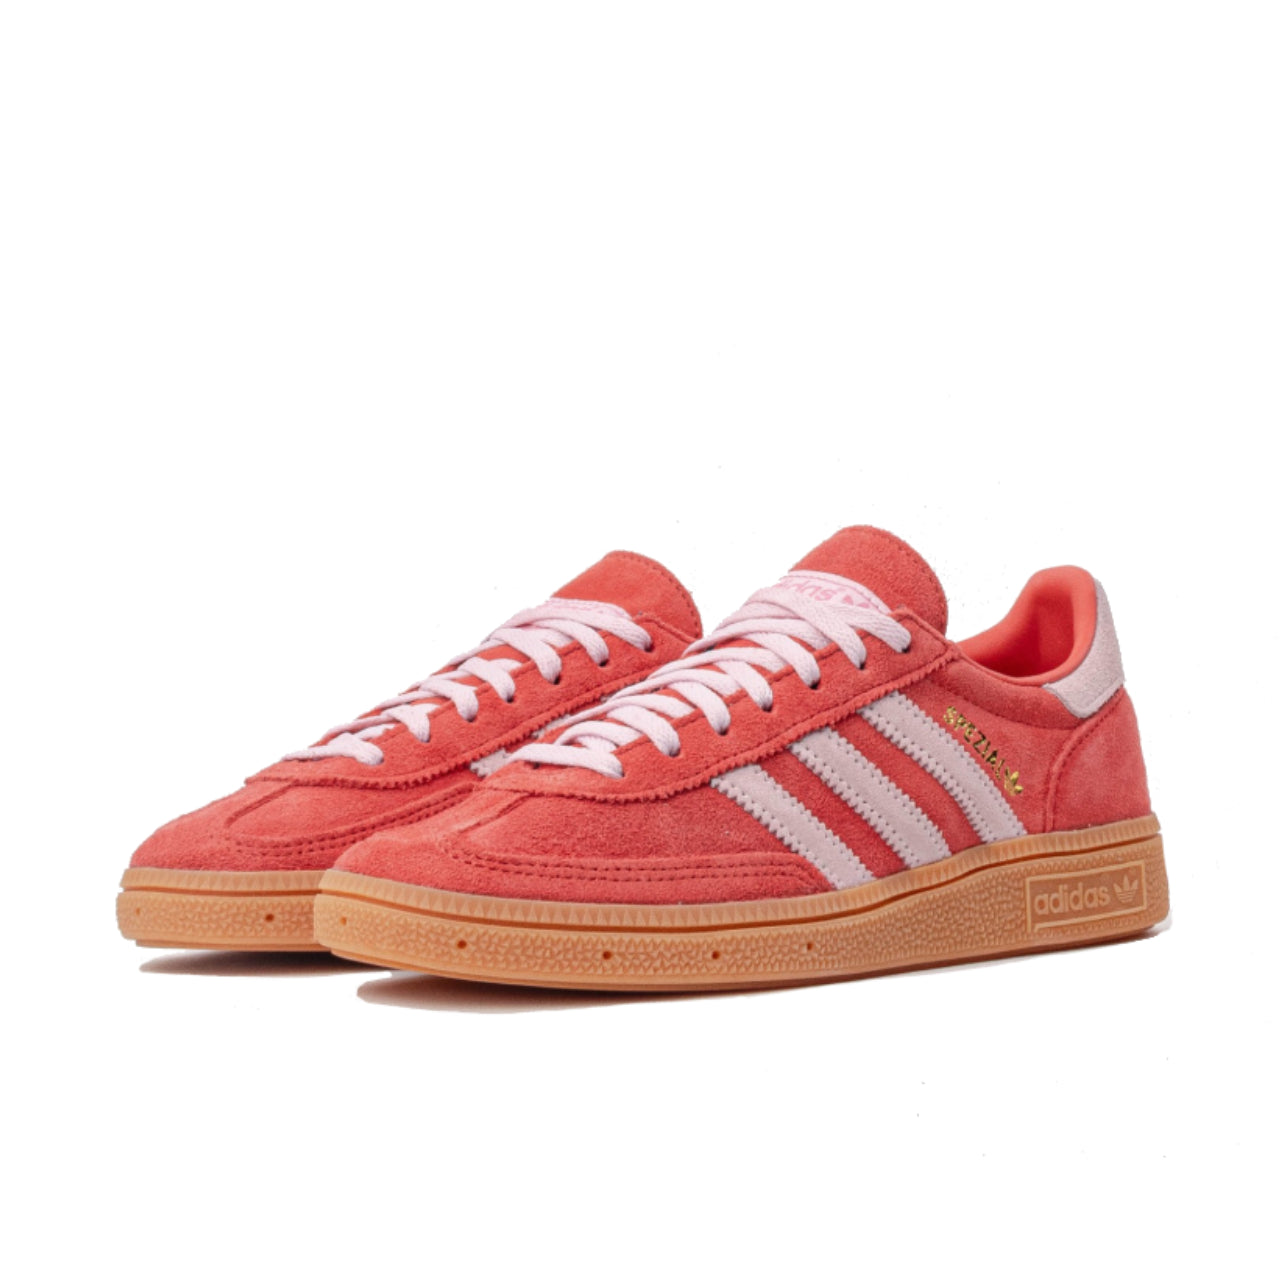 adidas Handball Spezial Bright Red Clear Pink - IE5894 - medial